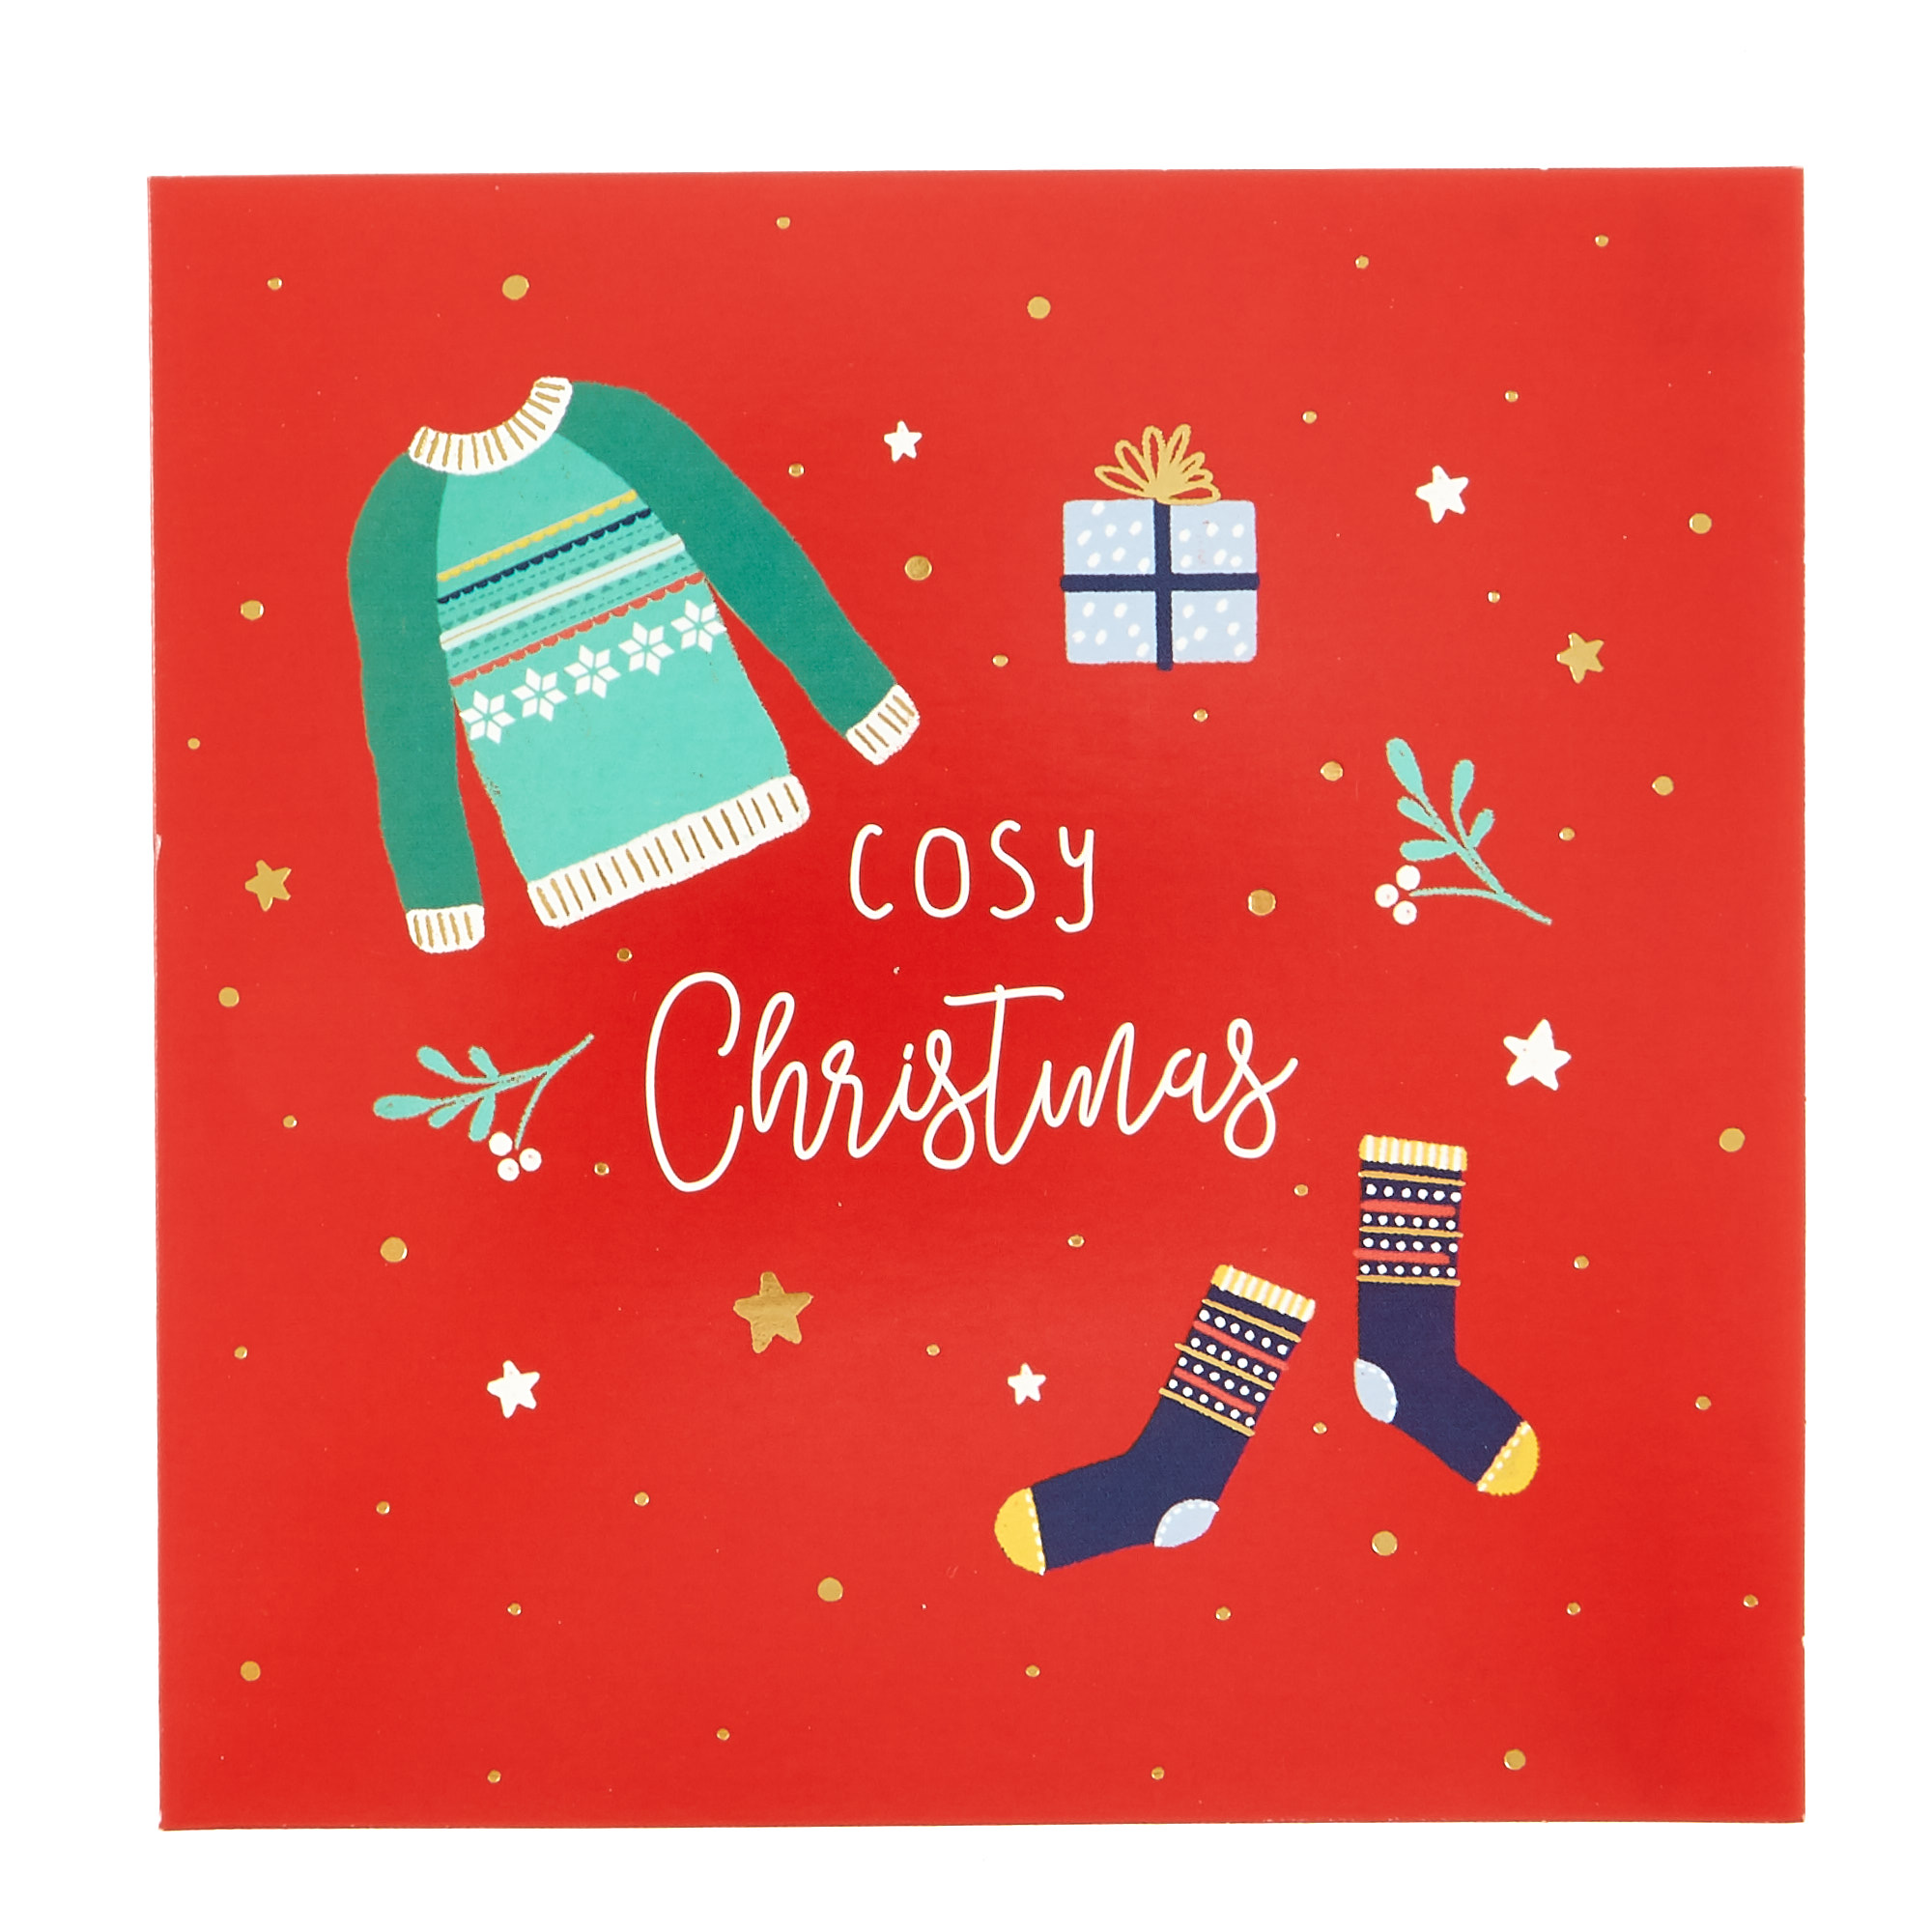 18 Charity Christmas Cards - Cosy & Warm (2 Designs)